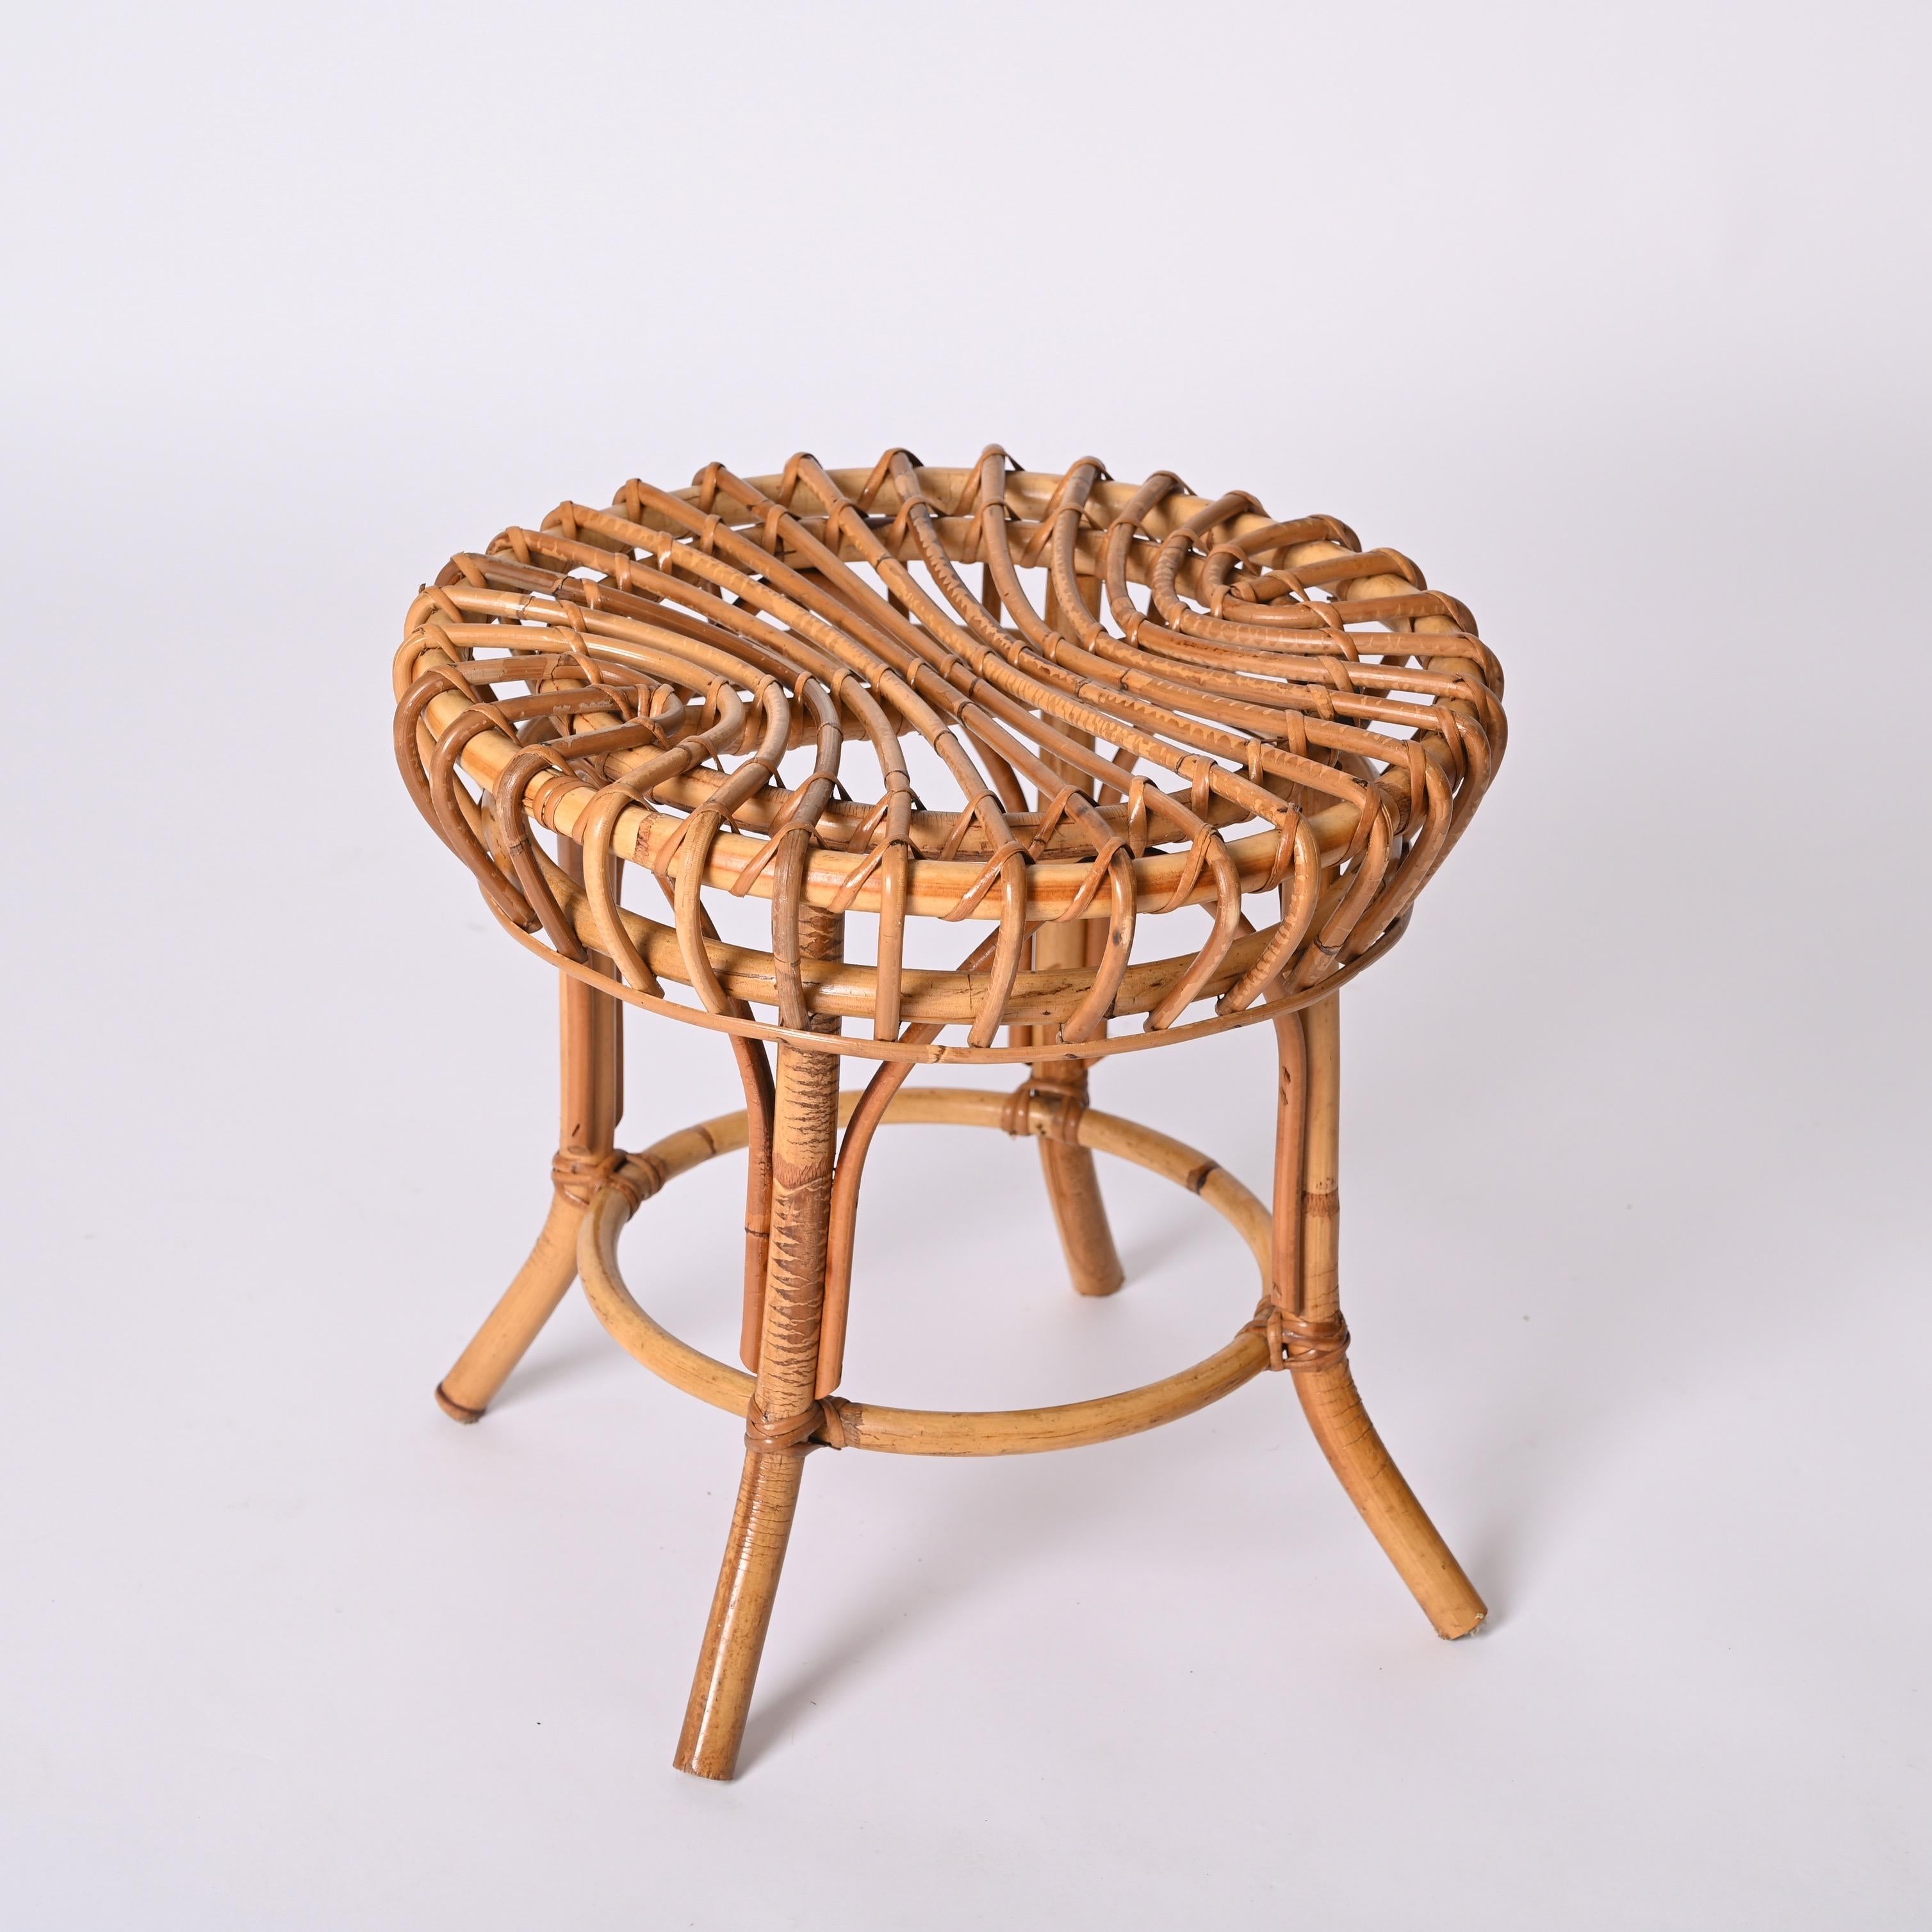 Franco Albini Midcentury Rattan and Bamboo Round Ottoman Stool, Italy 1960s For Sale 5